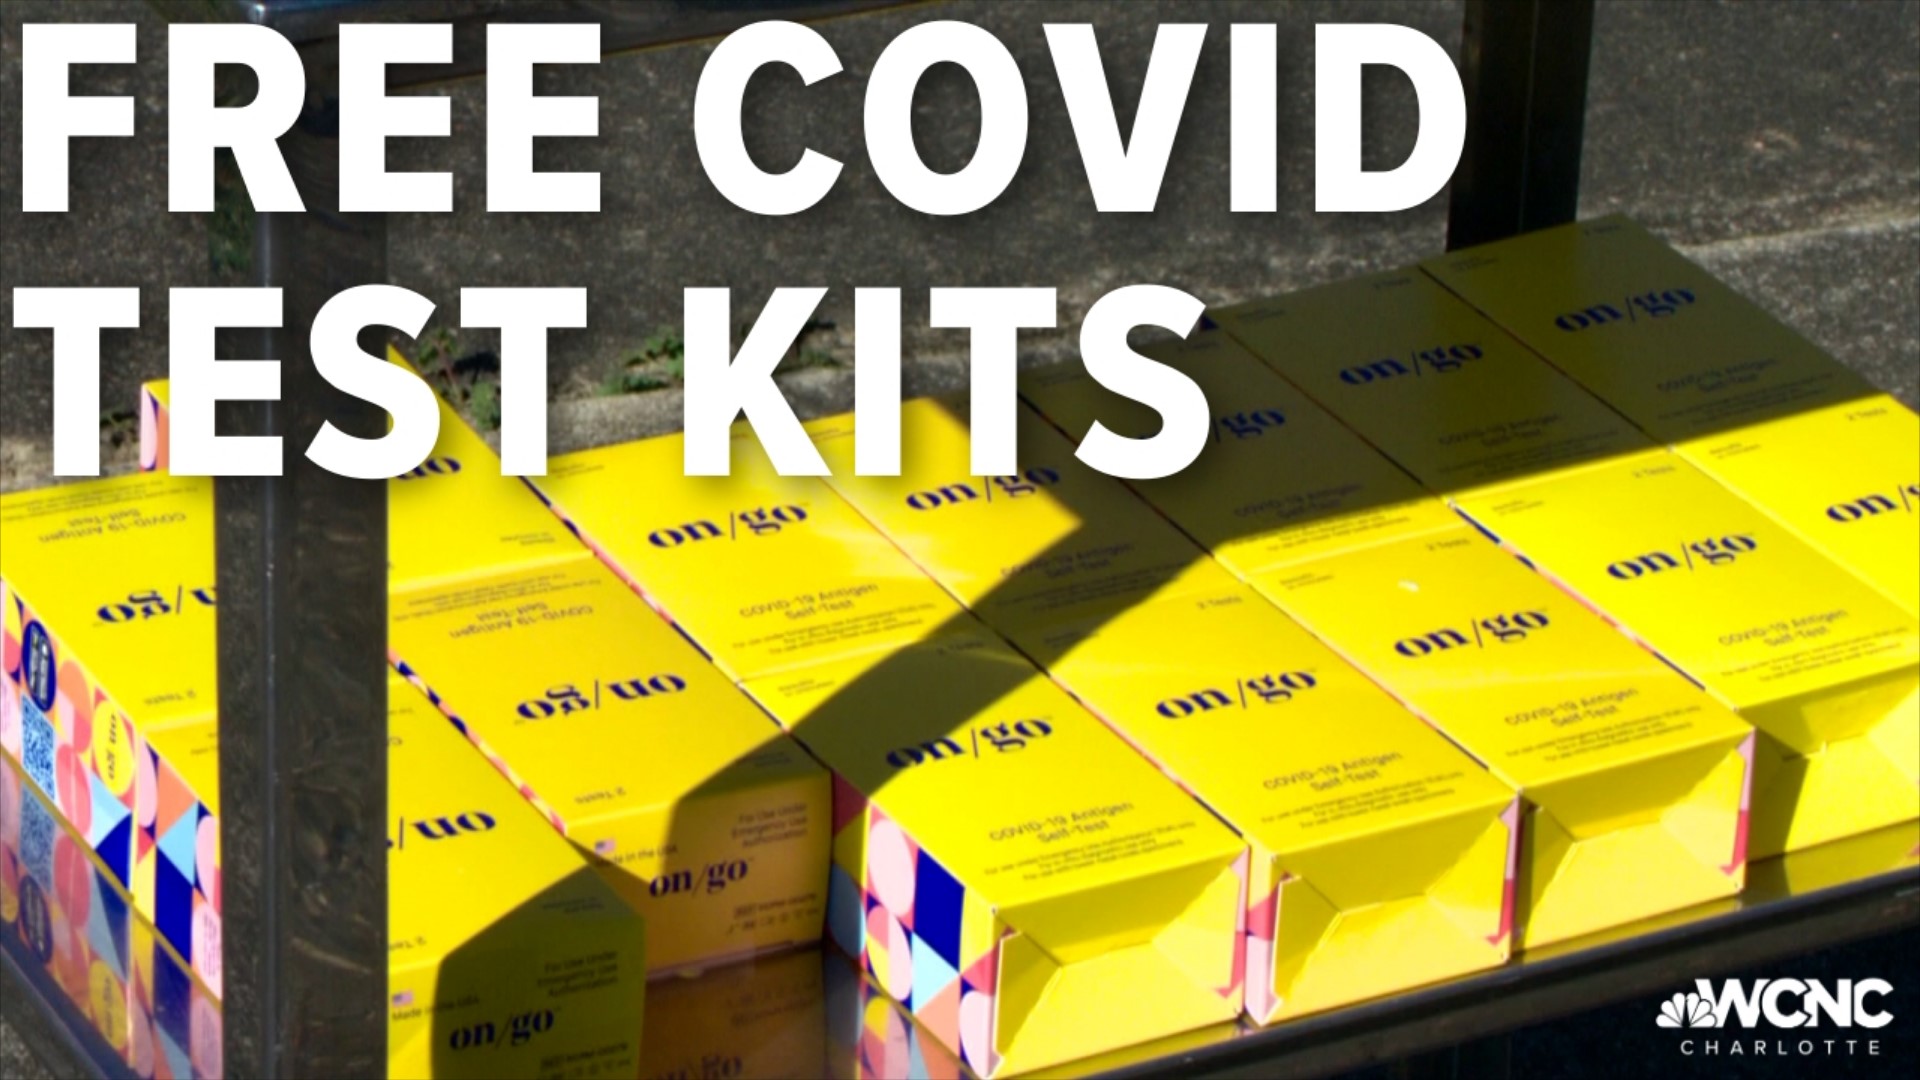 CMS families and staff members can order free COVID-19 testing kits delivered to their homes.